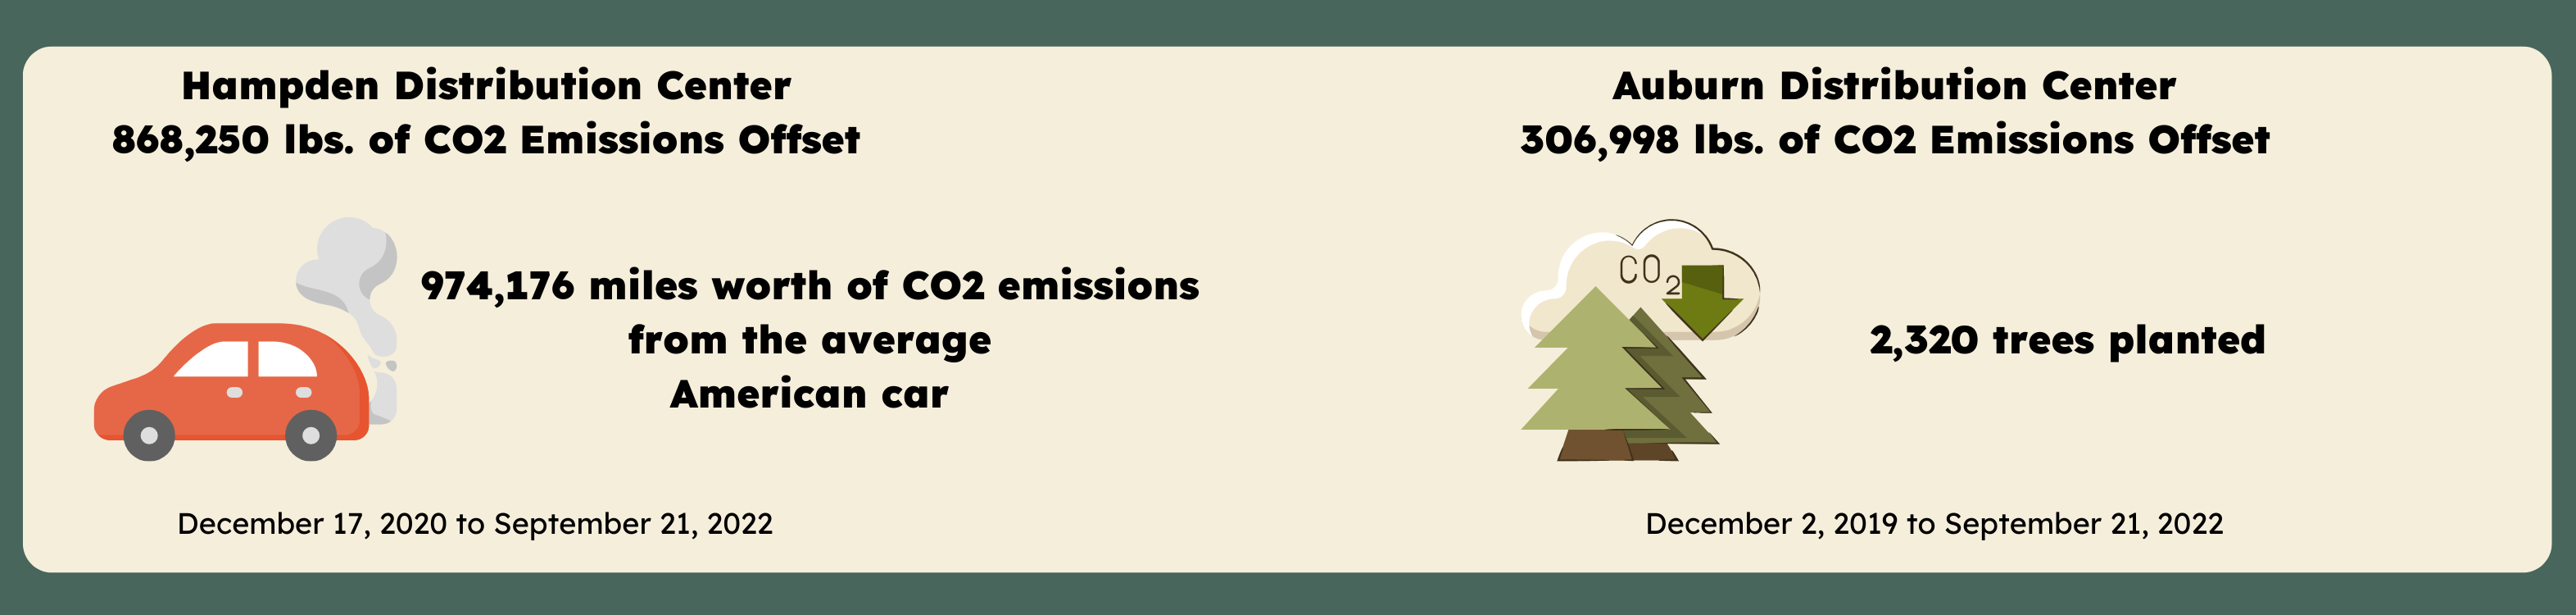 Solar CO2 Emissions Offset Graphic; Hampden 868,250 co2 emssions offset - 974176 miles worth of CO2 from average american car; Auburn distribution center 306,998 lbs of co2 emissions offset = 2,320 trees planted